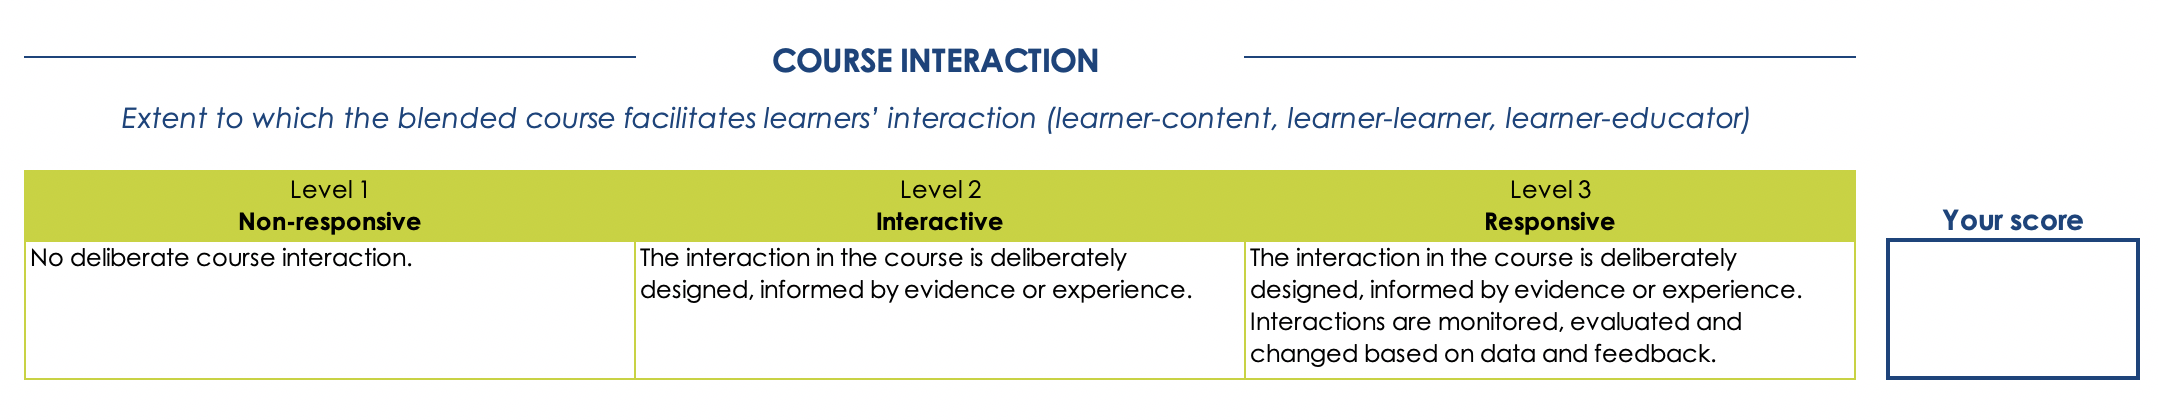 EMEBED Course Interaction Dimension